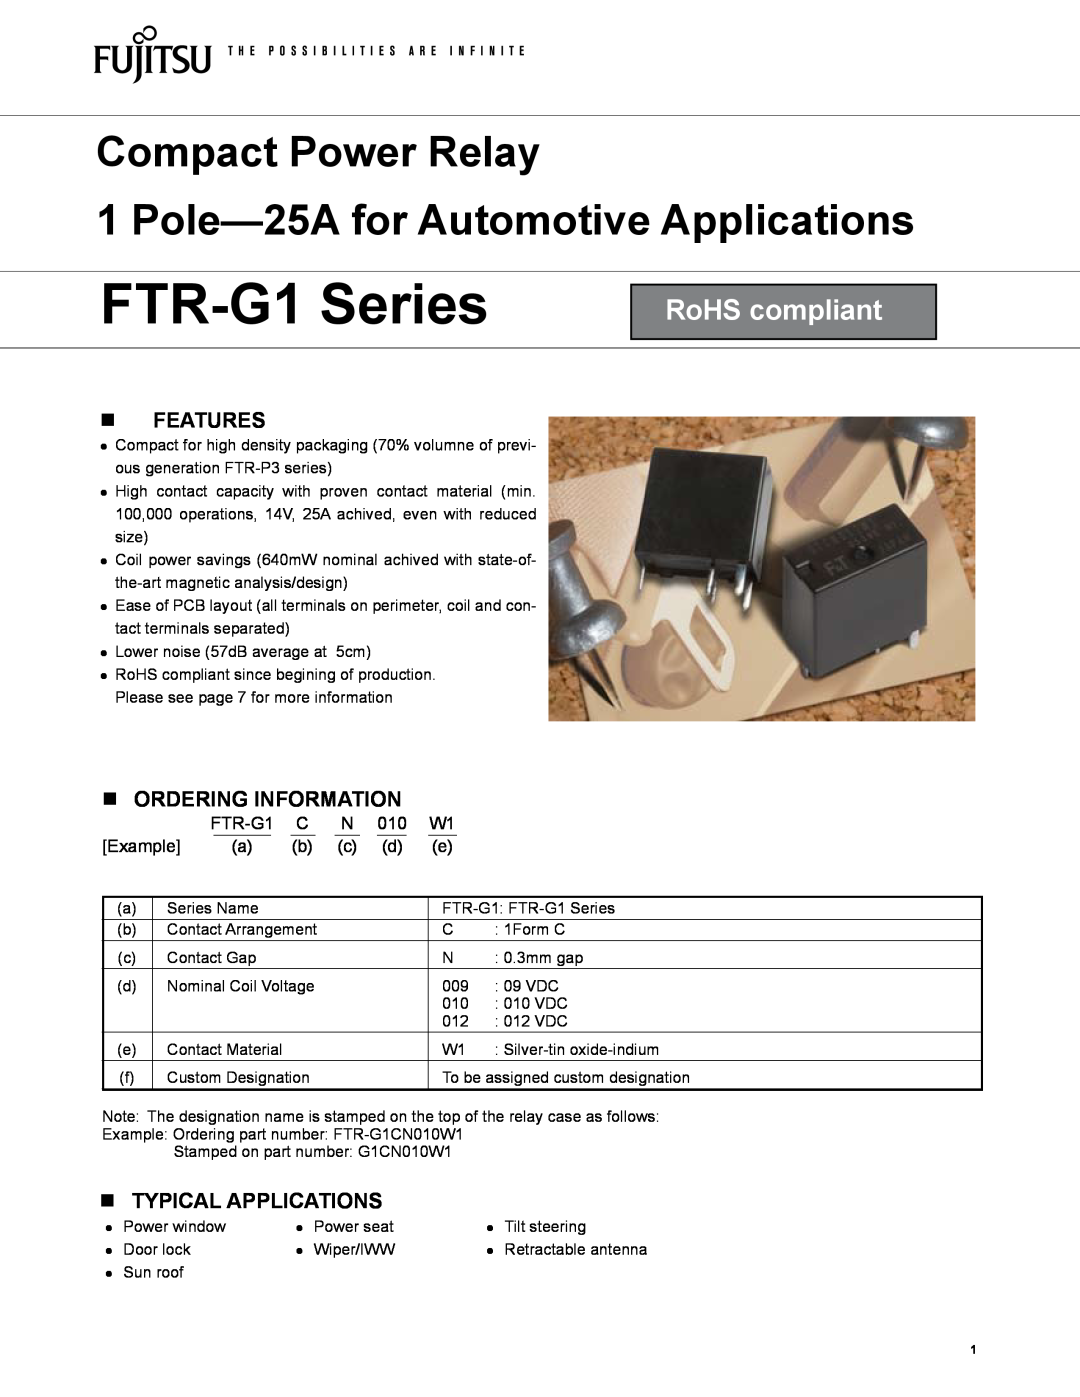 Fujitsu manual n FEATURES, n ORDERING INFORMATION, n TYPICAL APPLICATIONS, FTR-G1 Series, RoHS compliant 